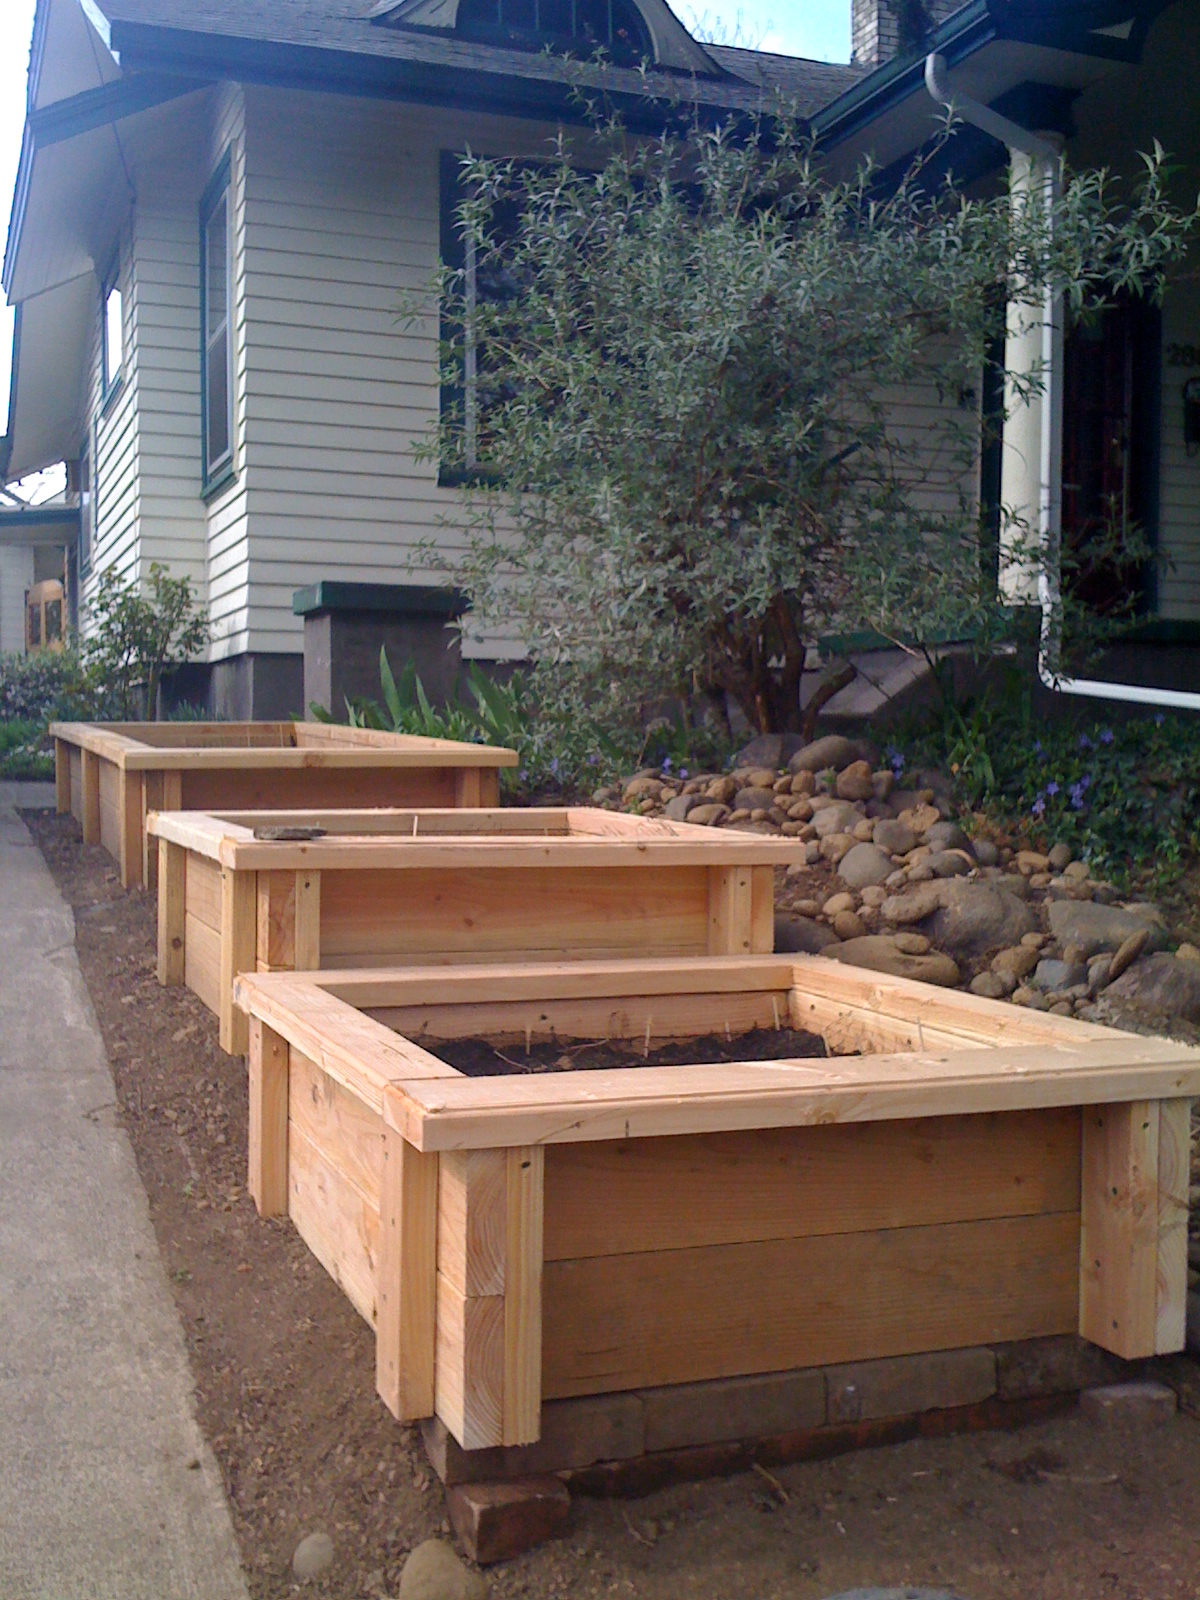 Building planter boxes | Andy Idsinga make fix share repeat